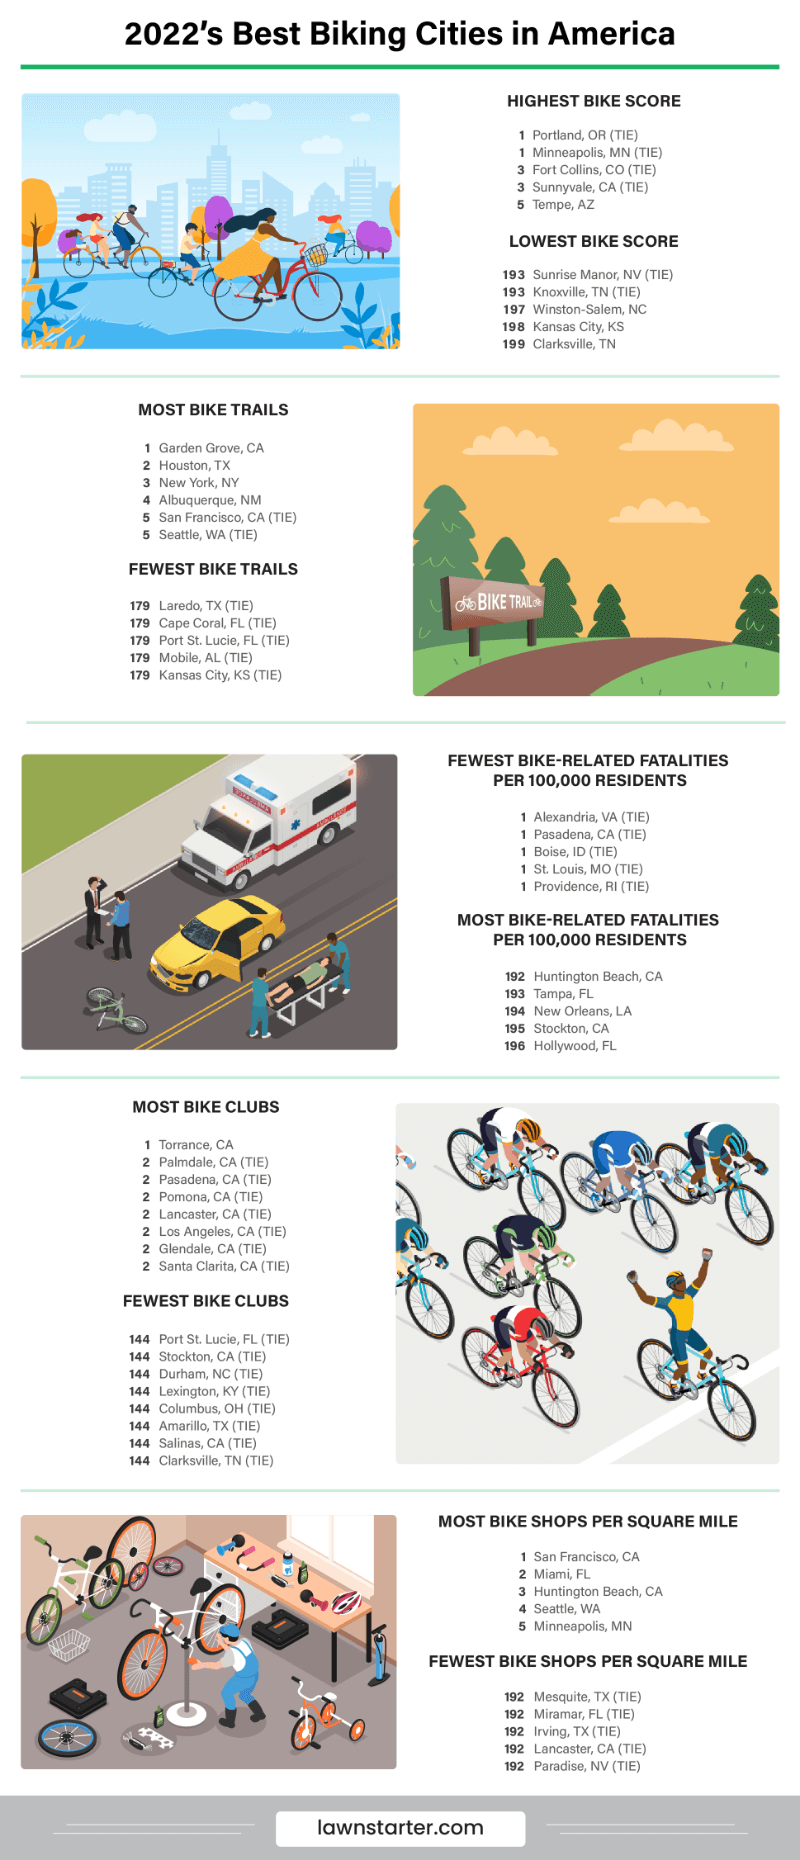 Infographic of 2022's best biking cities in America is based on bike score, trails, safety, and more